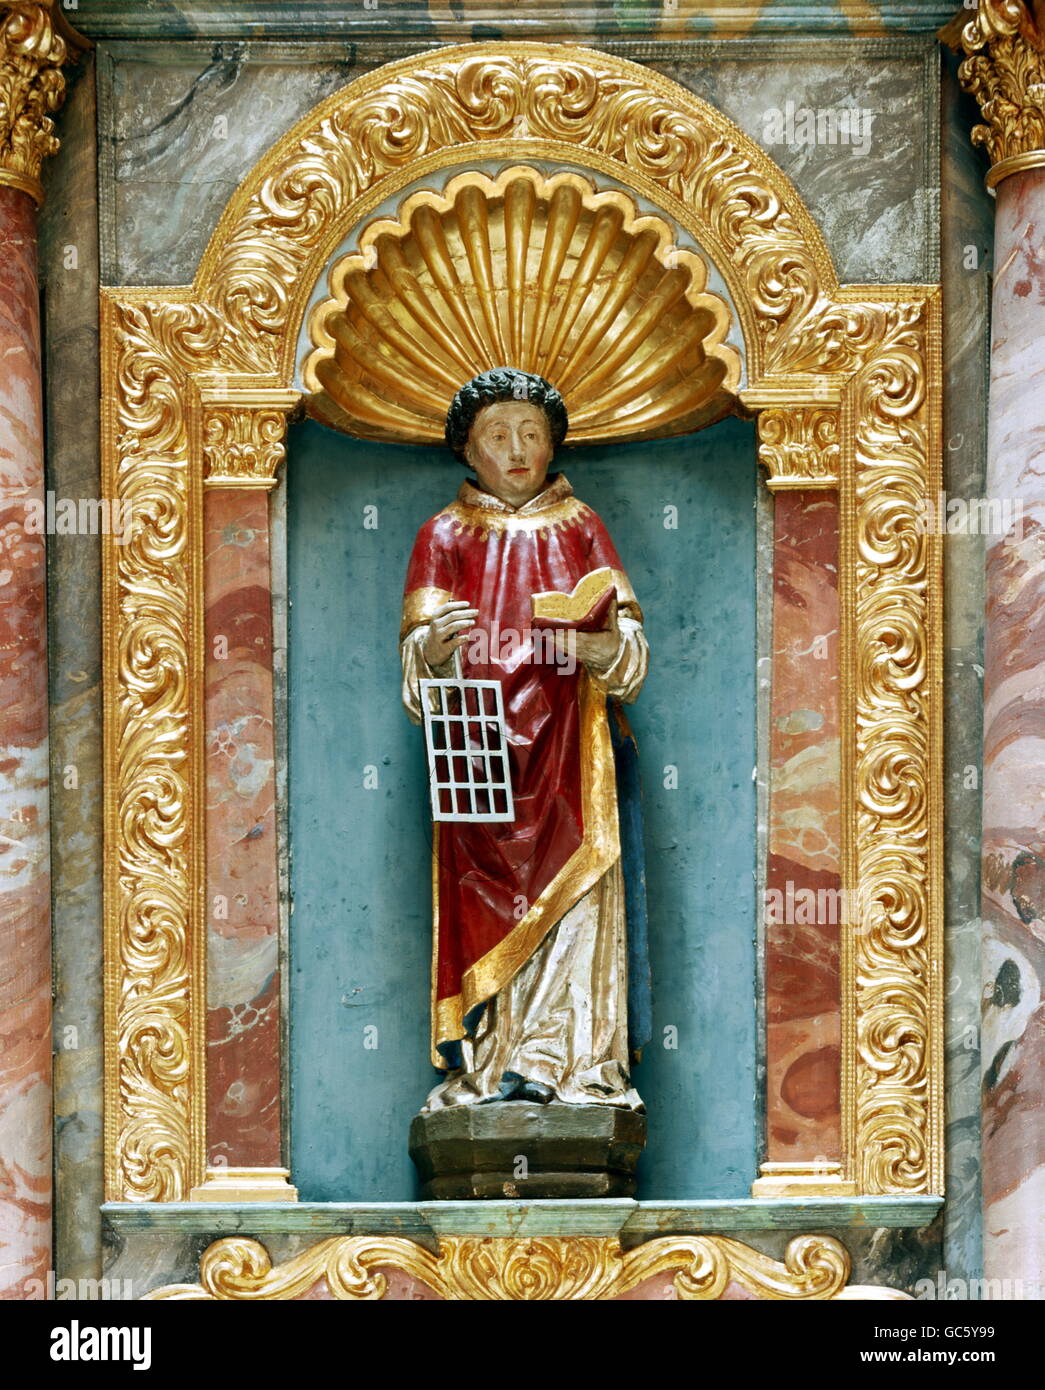 fine arts, religious art, saints, saint Laurentius (+ 10.8.258), sculpture, wooden, carving, Denkendorf church, Middle Franconia, Spanish, deacon in Rome, martyr of the Christian persecution under emperor Valerianus, religion, Christianity, sculpture, chaplain, chaplains, clergyman, clergymen, cleric, clerics, ecclesiastic, historic, historical, people, ancient world, Additional-Rights-Clearences-Not Available Stock Photo